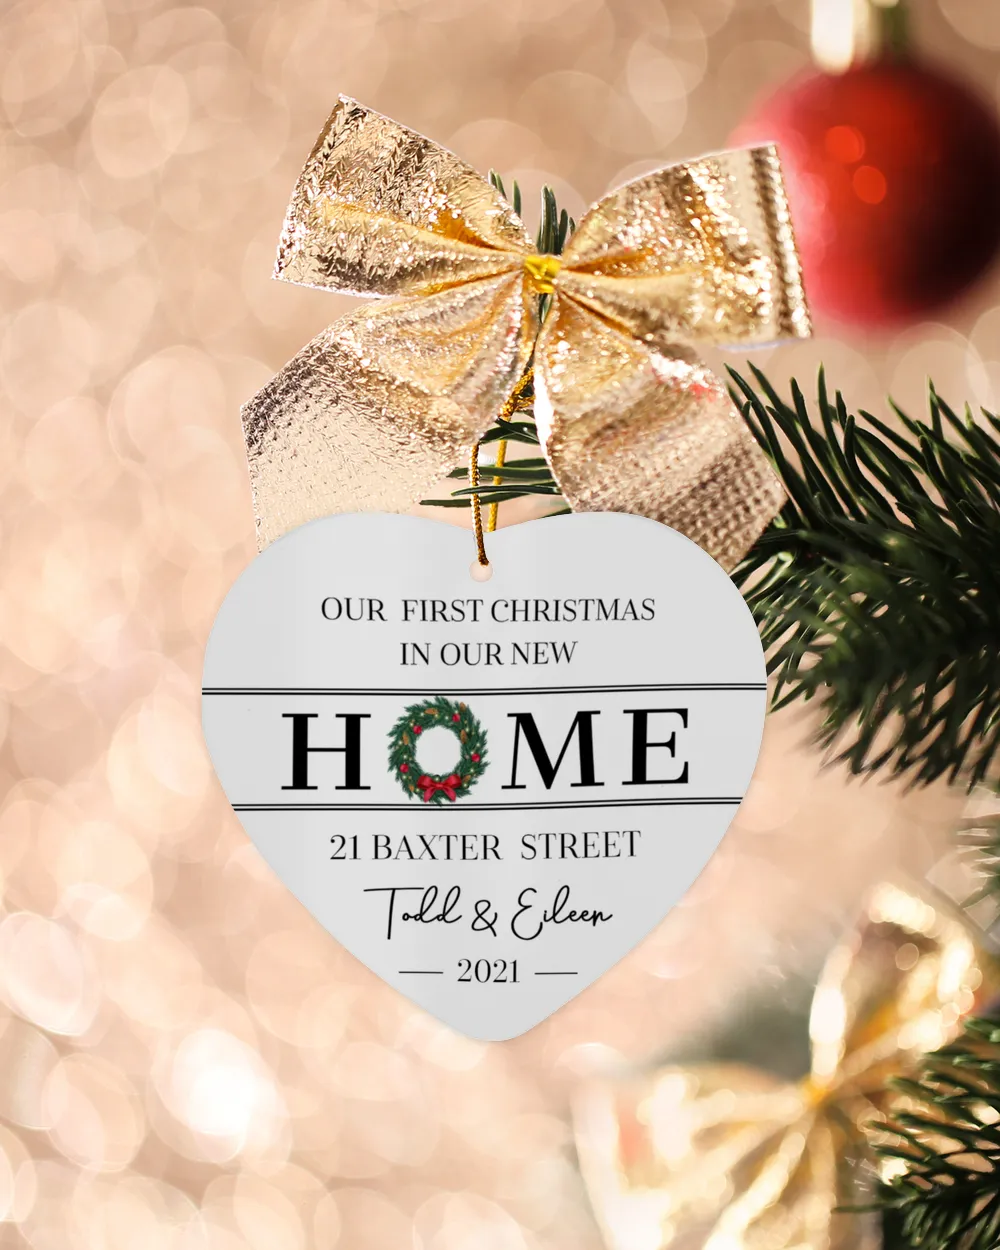 New Home Ornament - Our First Christmas In Our New Home With Address, Names and Year - New Home Christmas Ornament - Wreath New House Ornament | Christmas Ornaments | Pine Tree Ornaments.